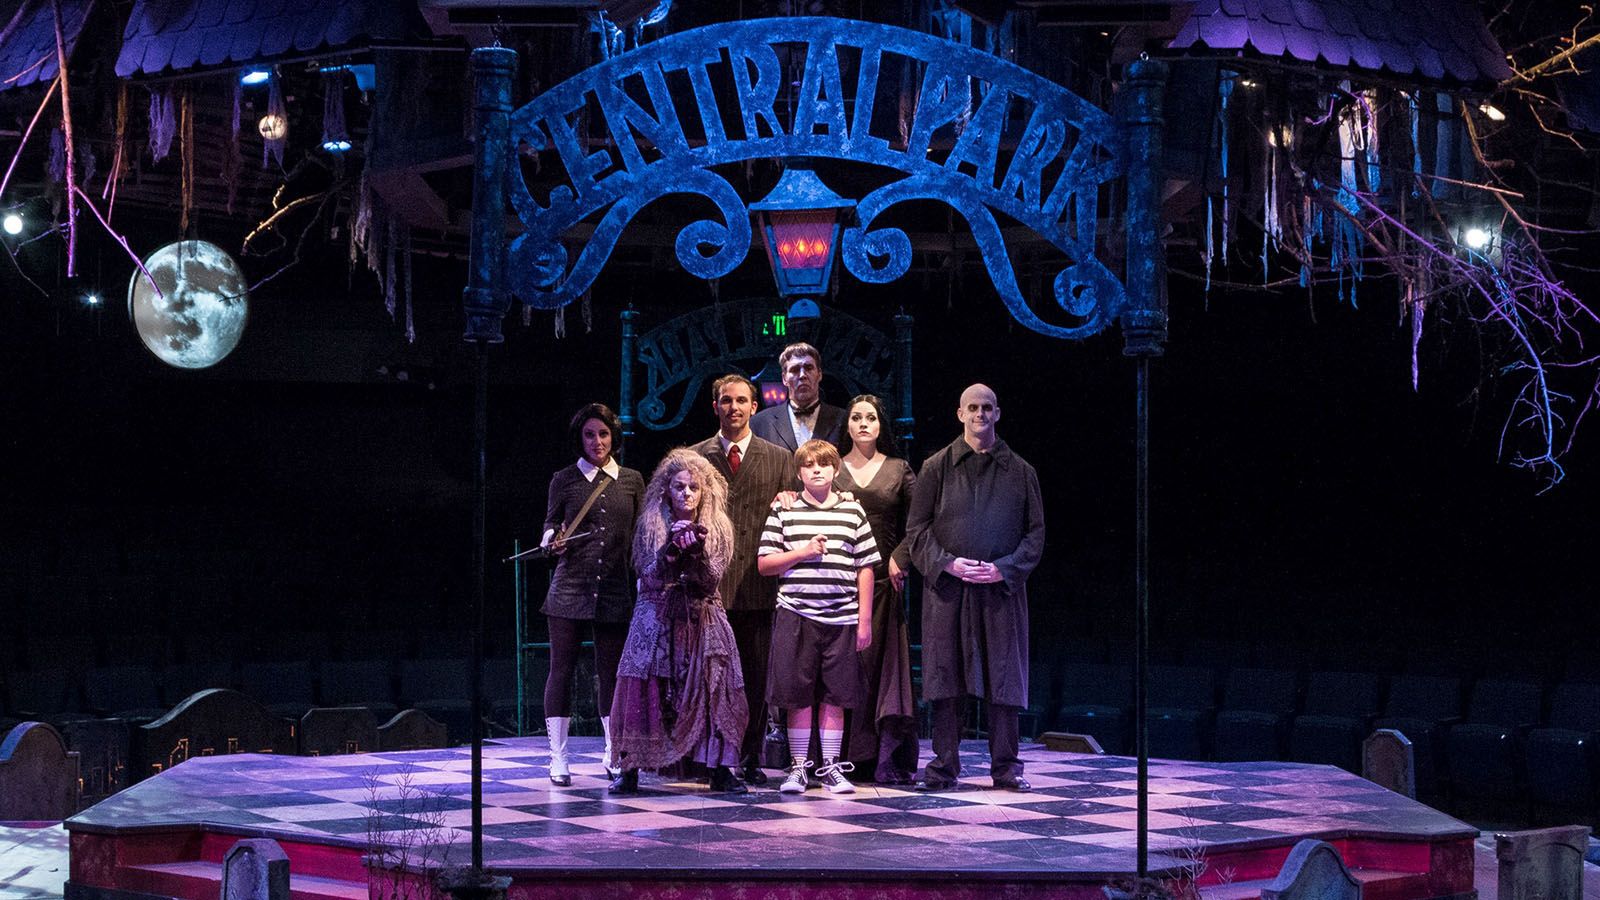 The final performance of "The Addams Family" at the Wagon Wheel will be July 23.